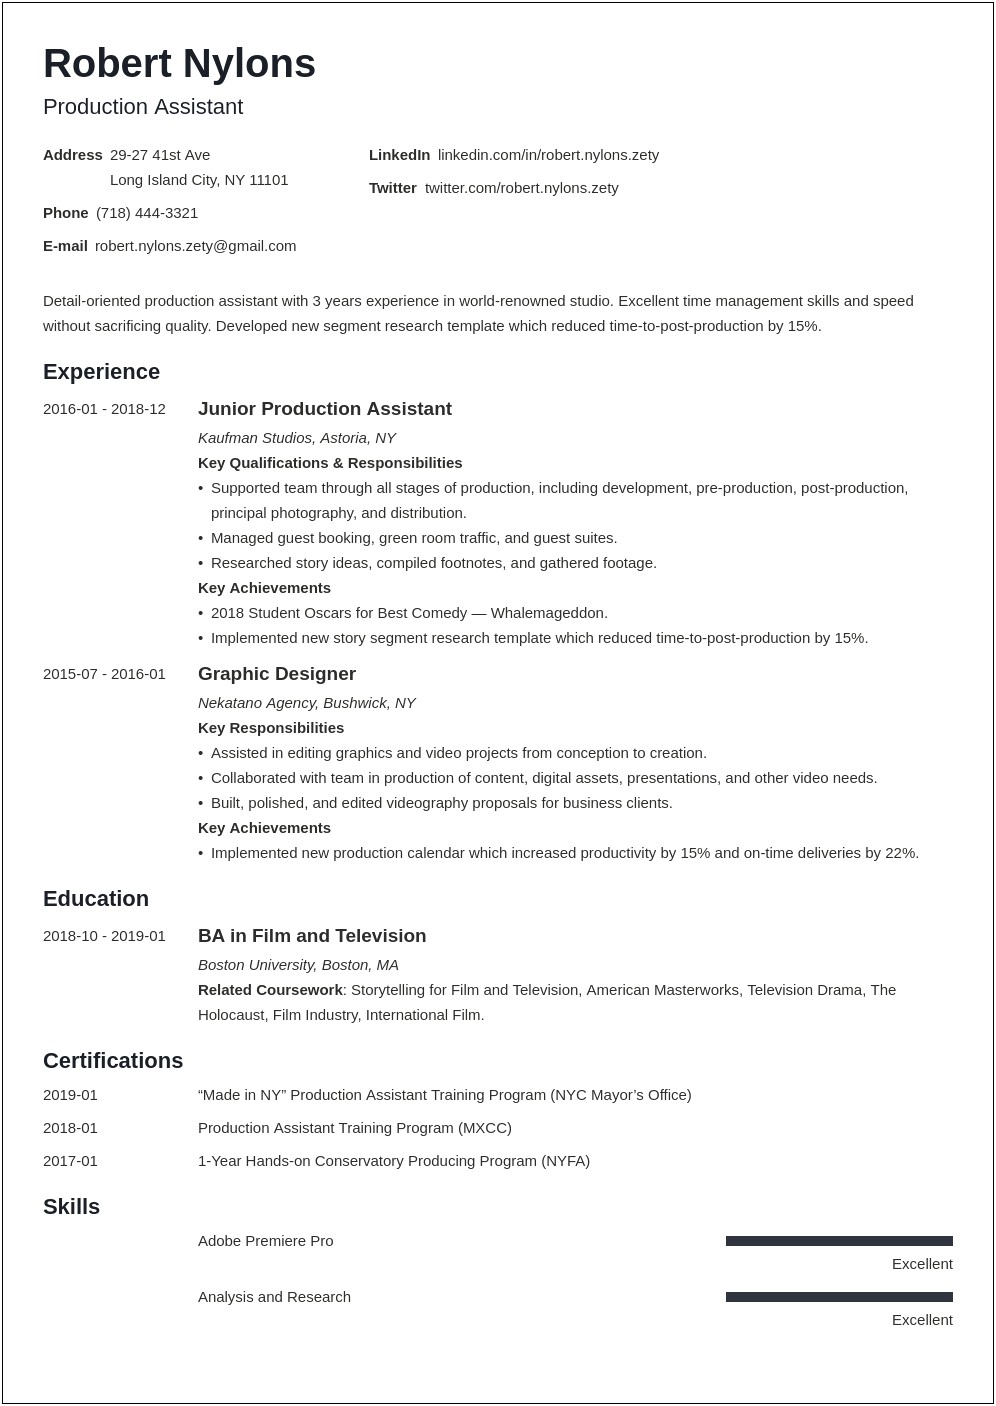 Resume Format For Assistant Production Manager